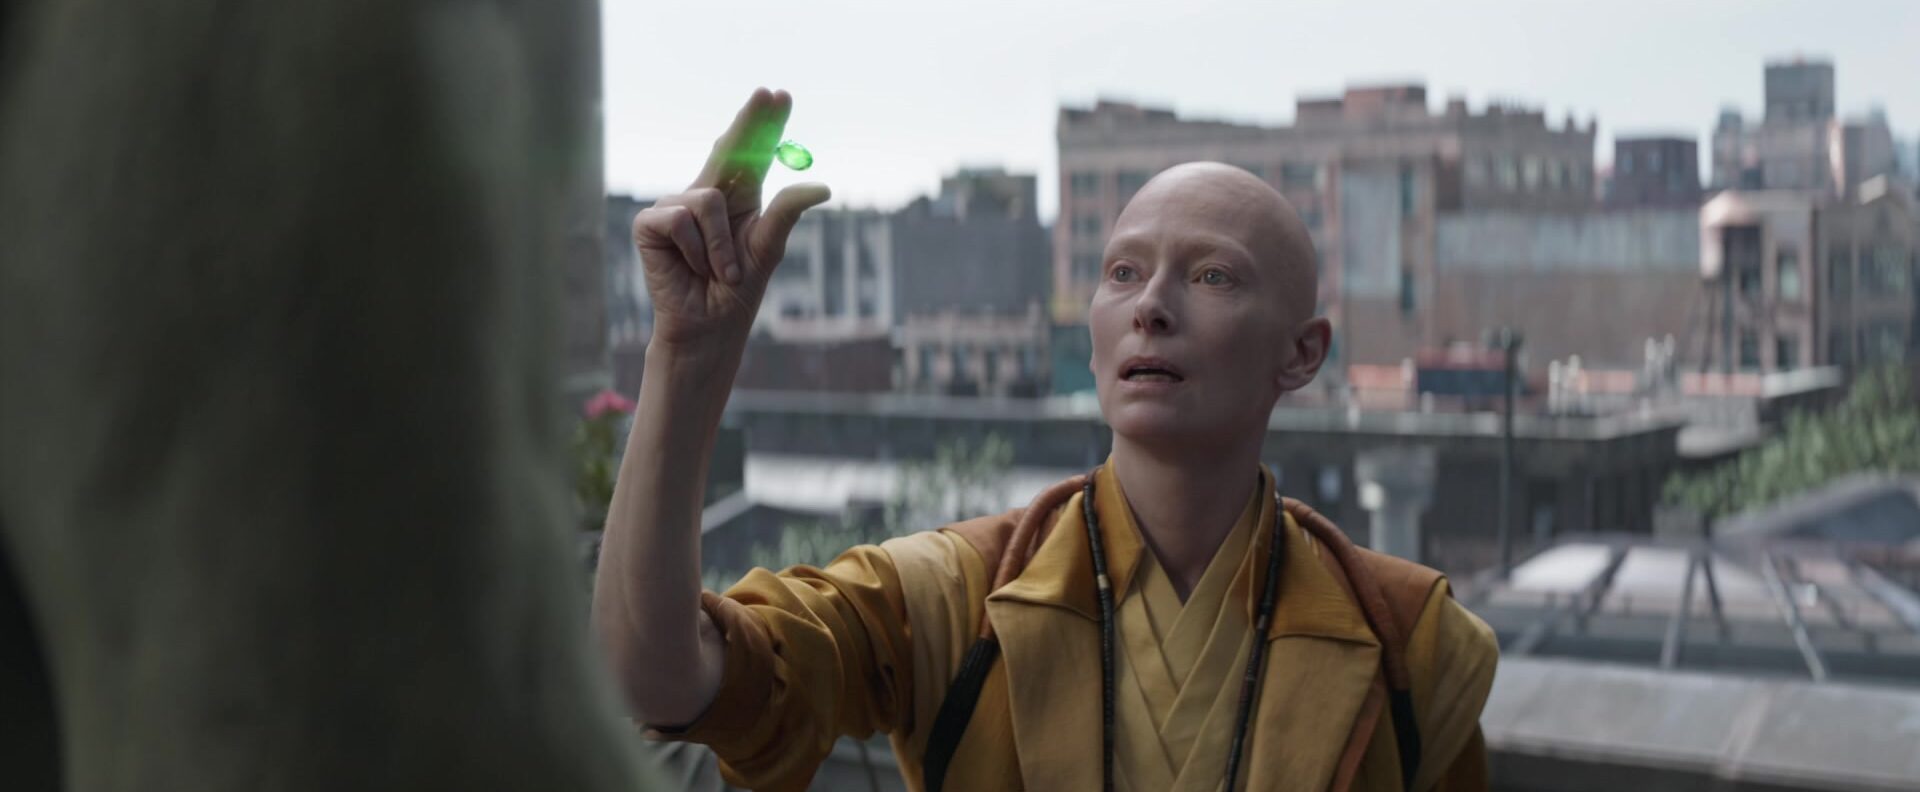 The Ancient One (Tilda Swinton) offers the Time Stone to the Hulk ()Mark Ruffalo) in Avengers: endgame (2019), Marvel Entertainment